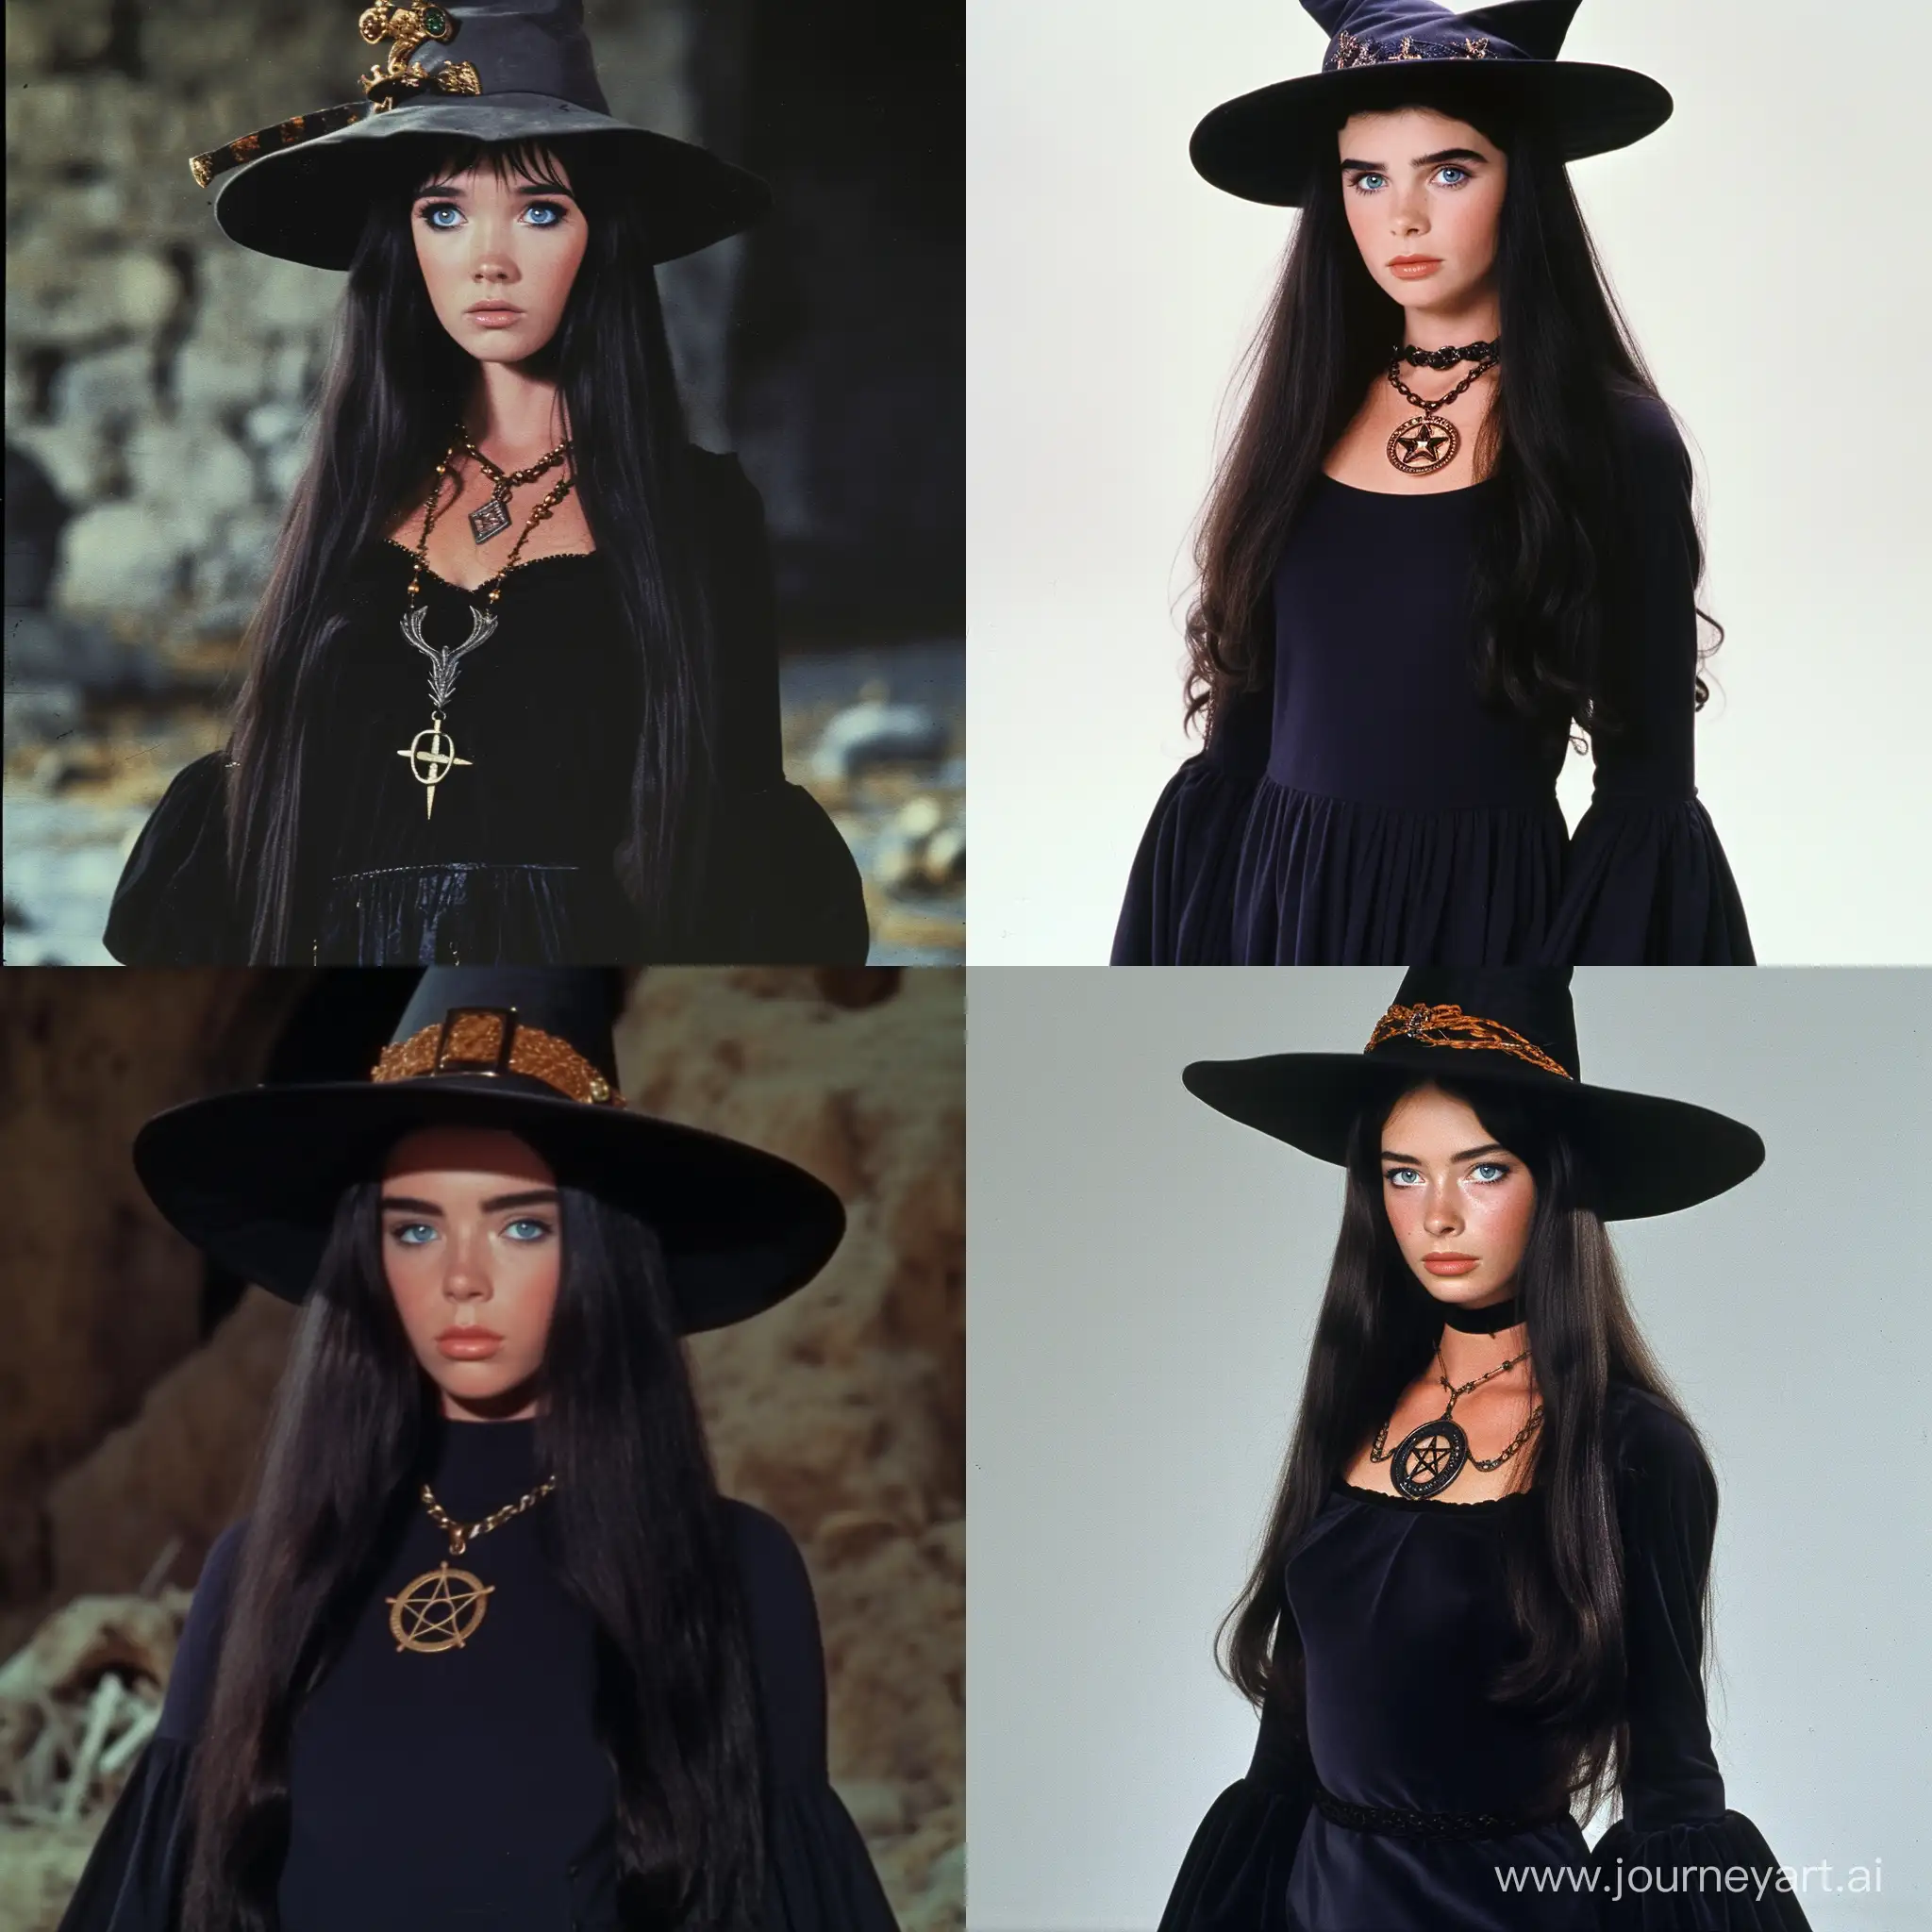 Mysterious-Witch-in-Black-Dress-and-Pentagram-Necklace